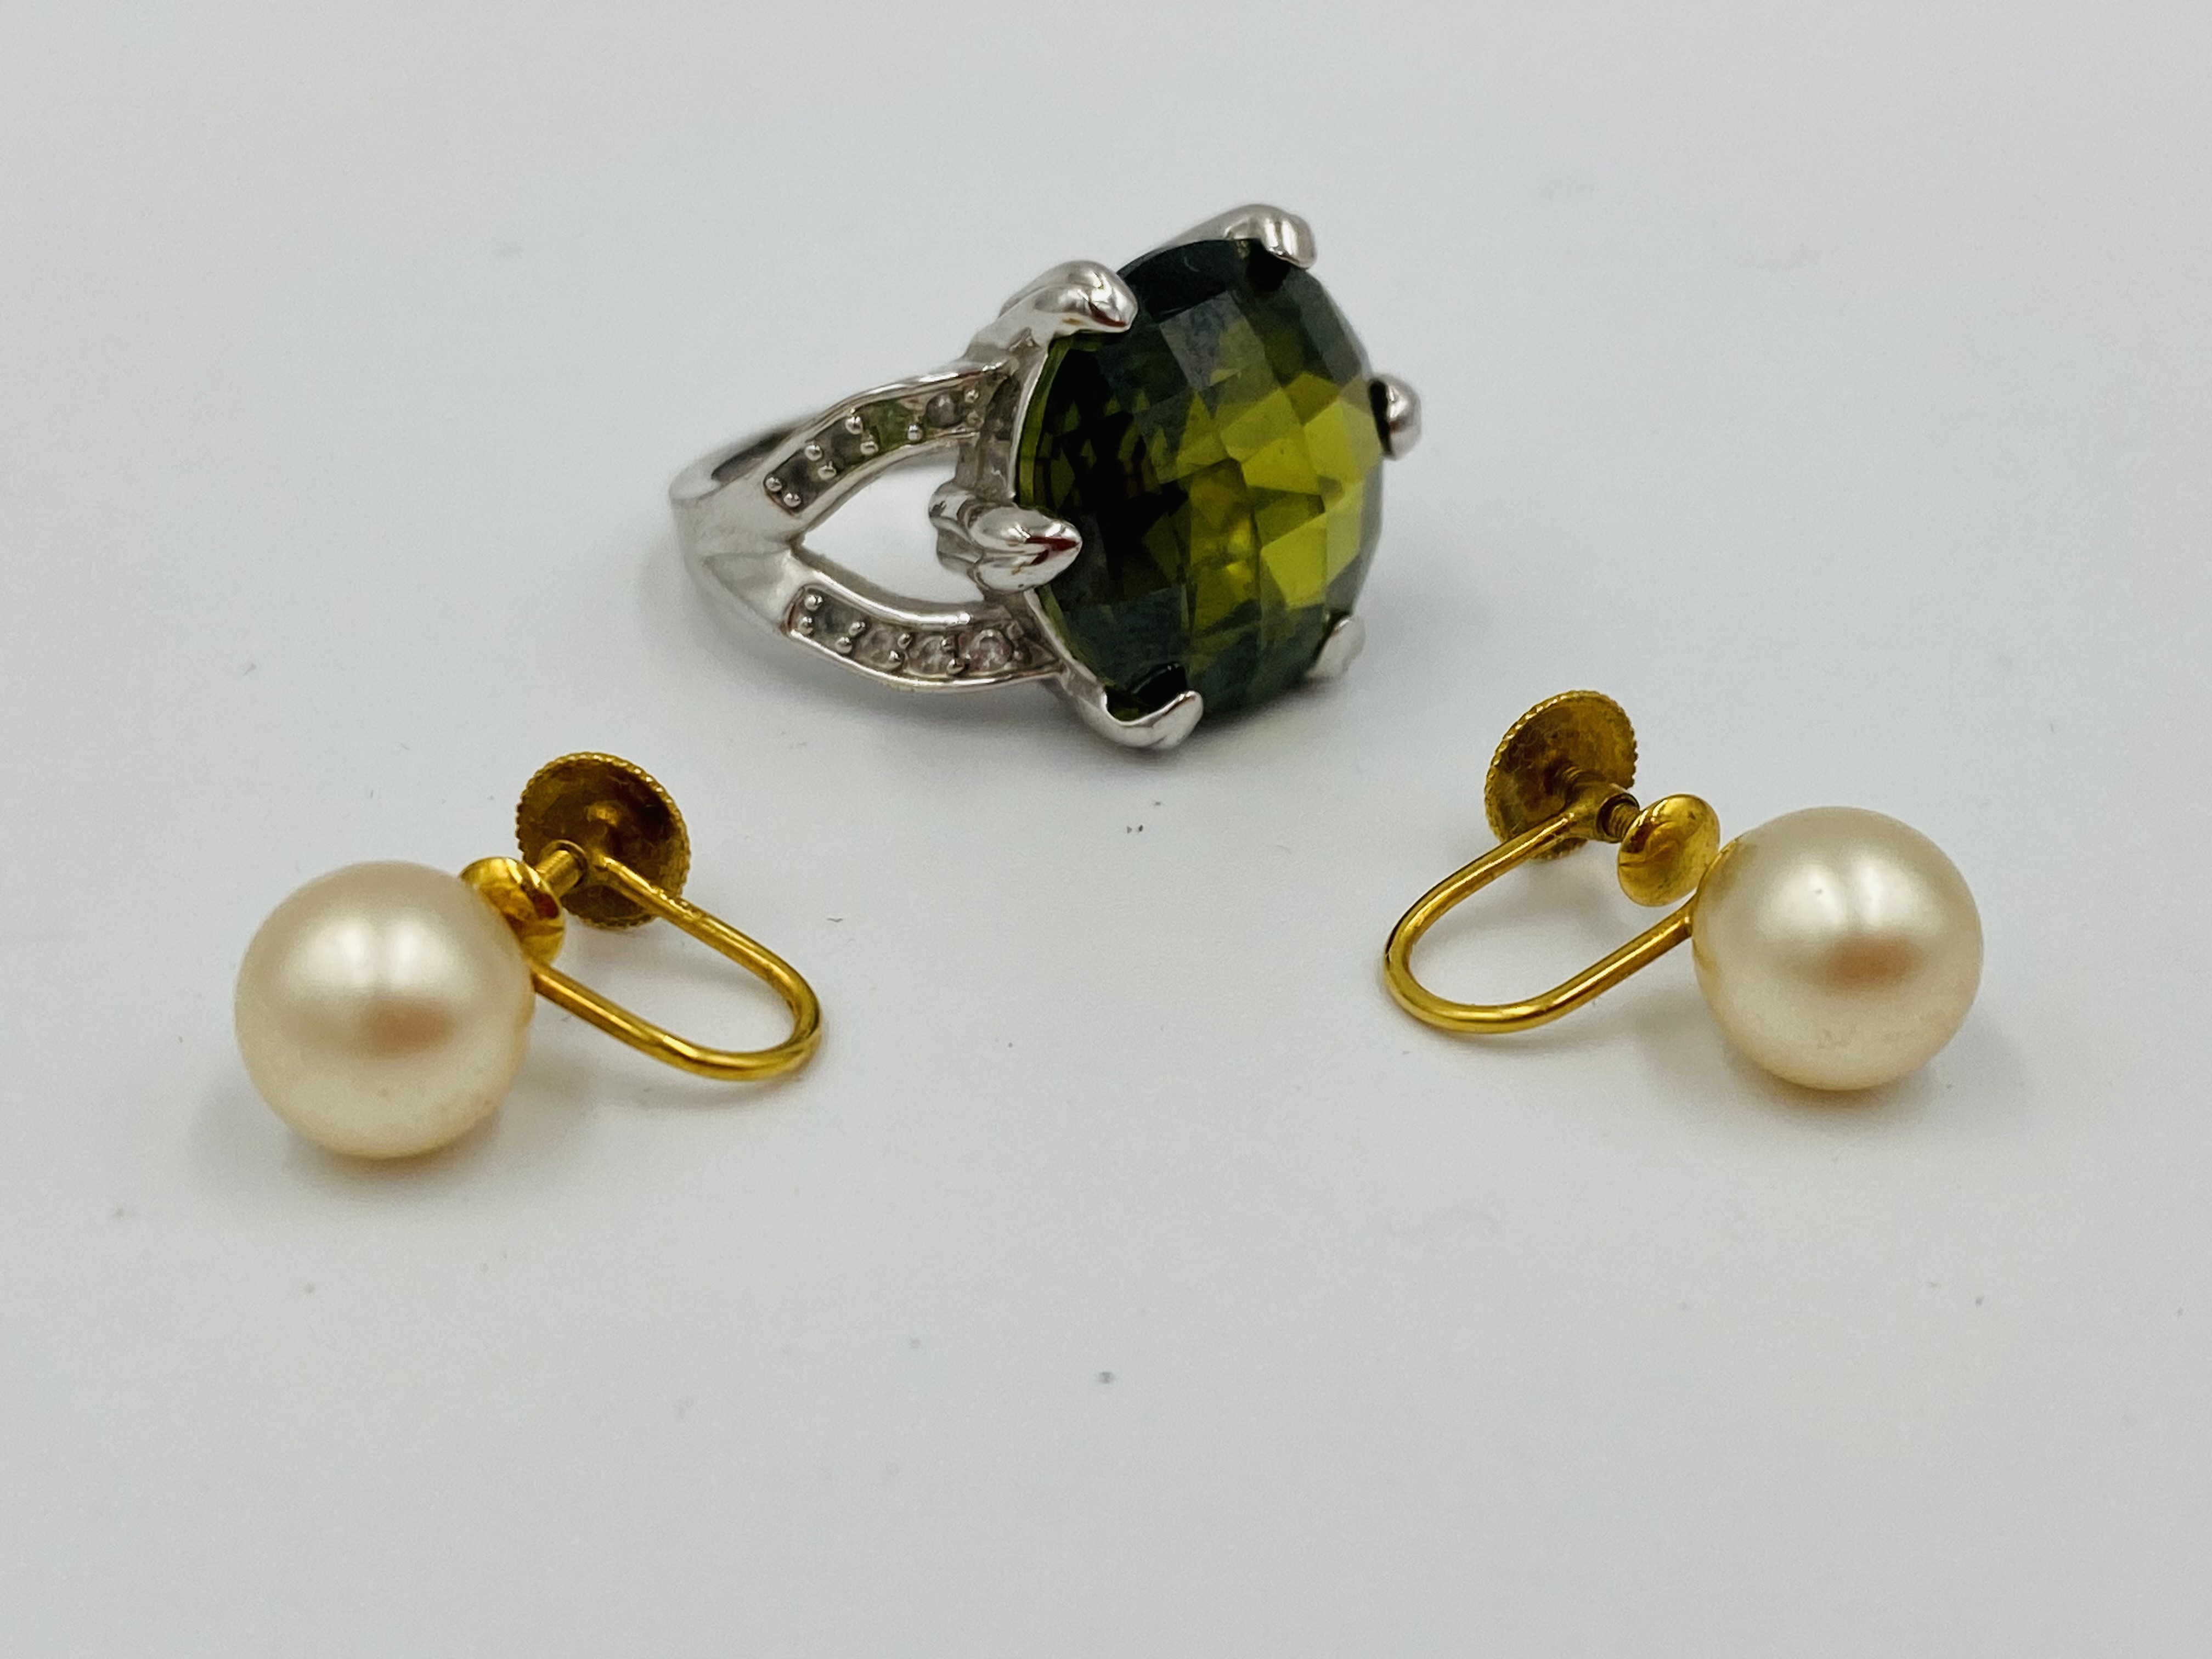 Pair of Ciro earrings together with a ring set with a tourmaline